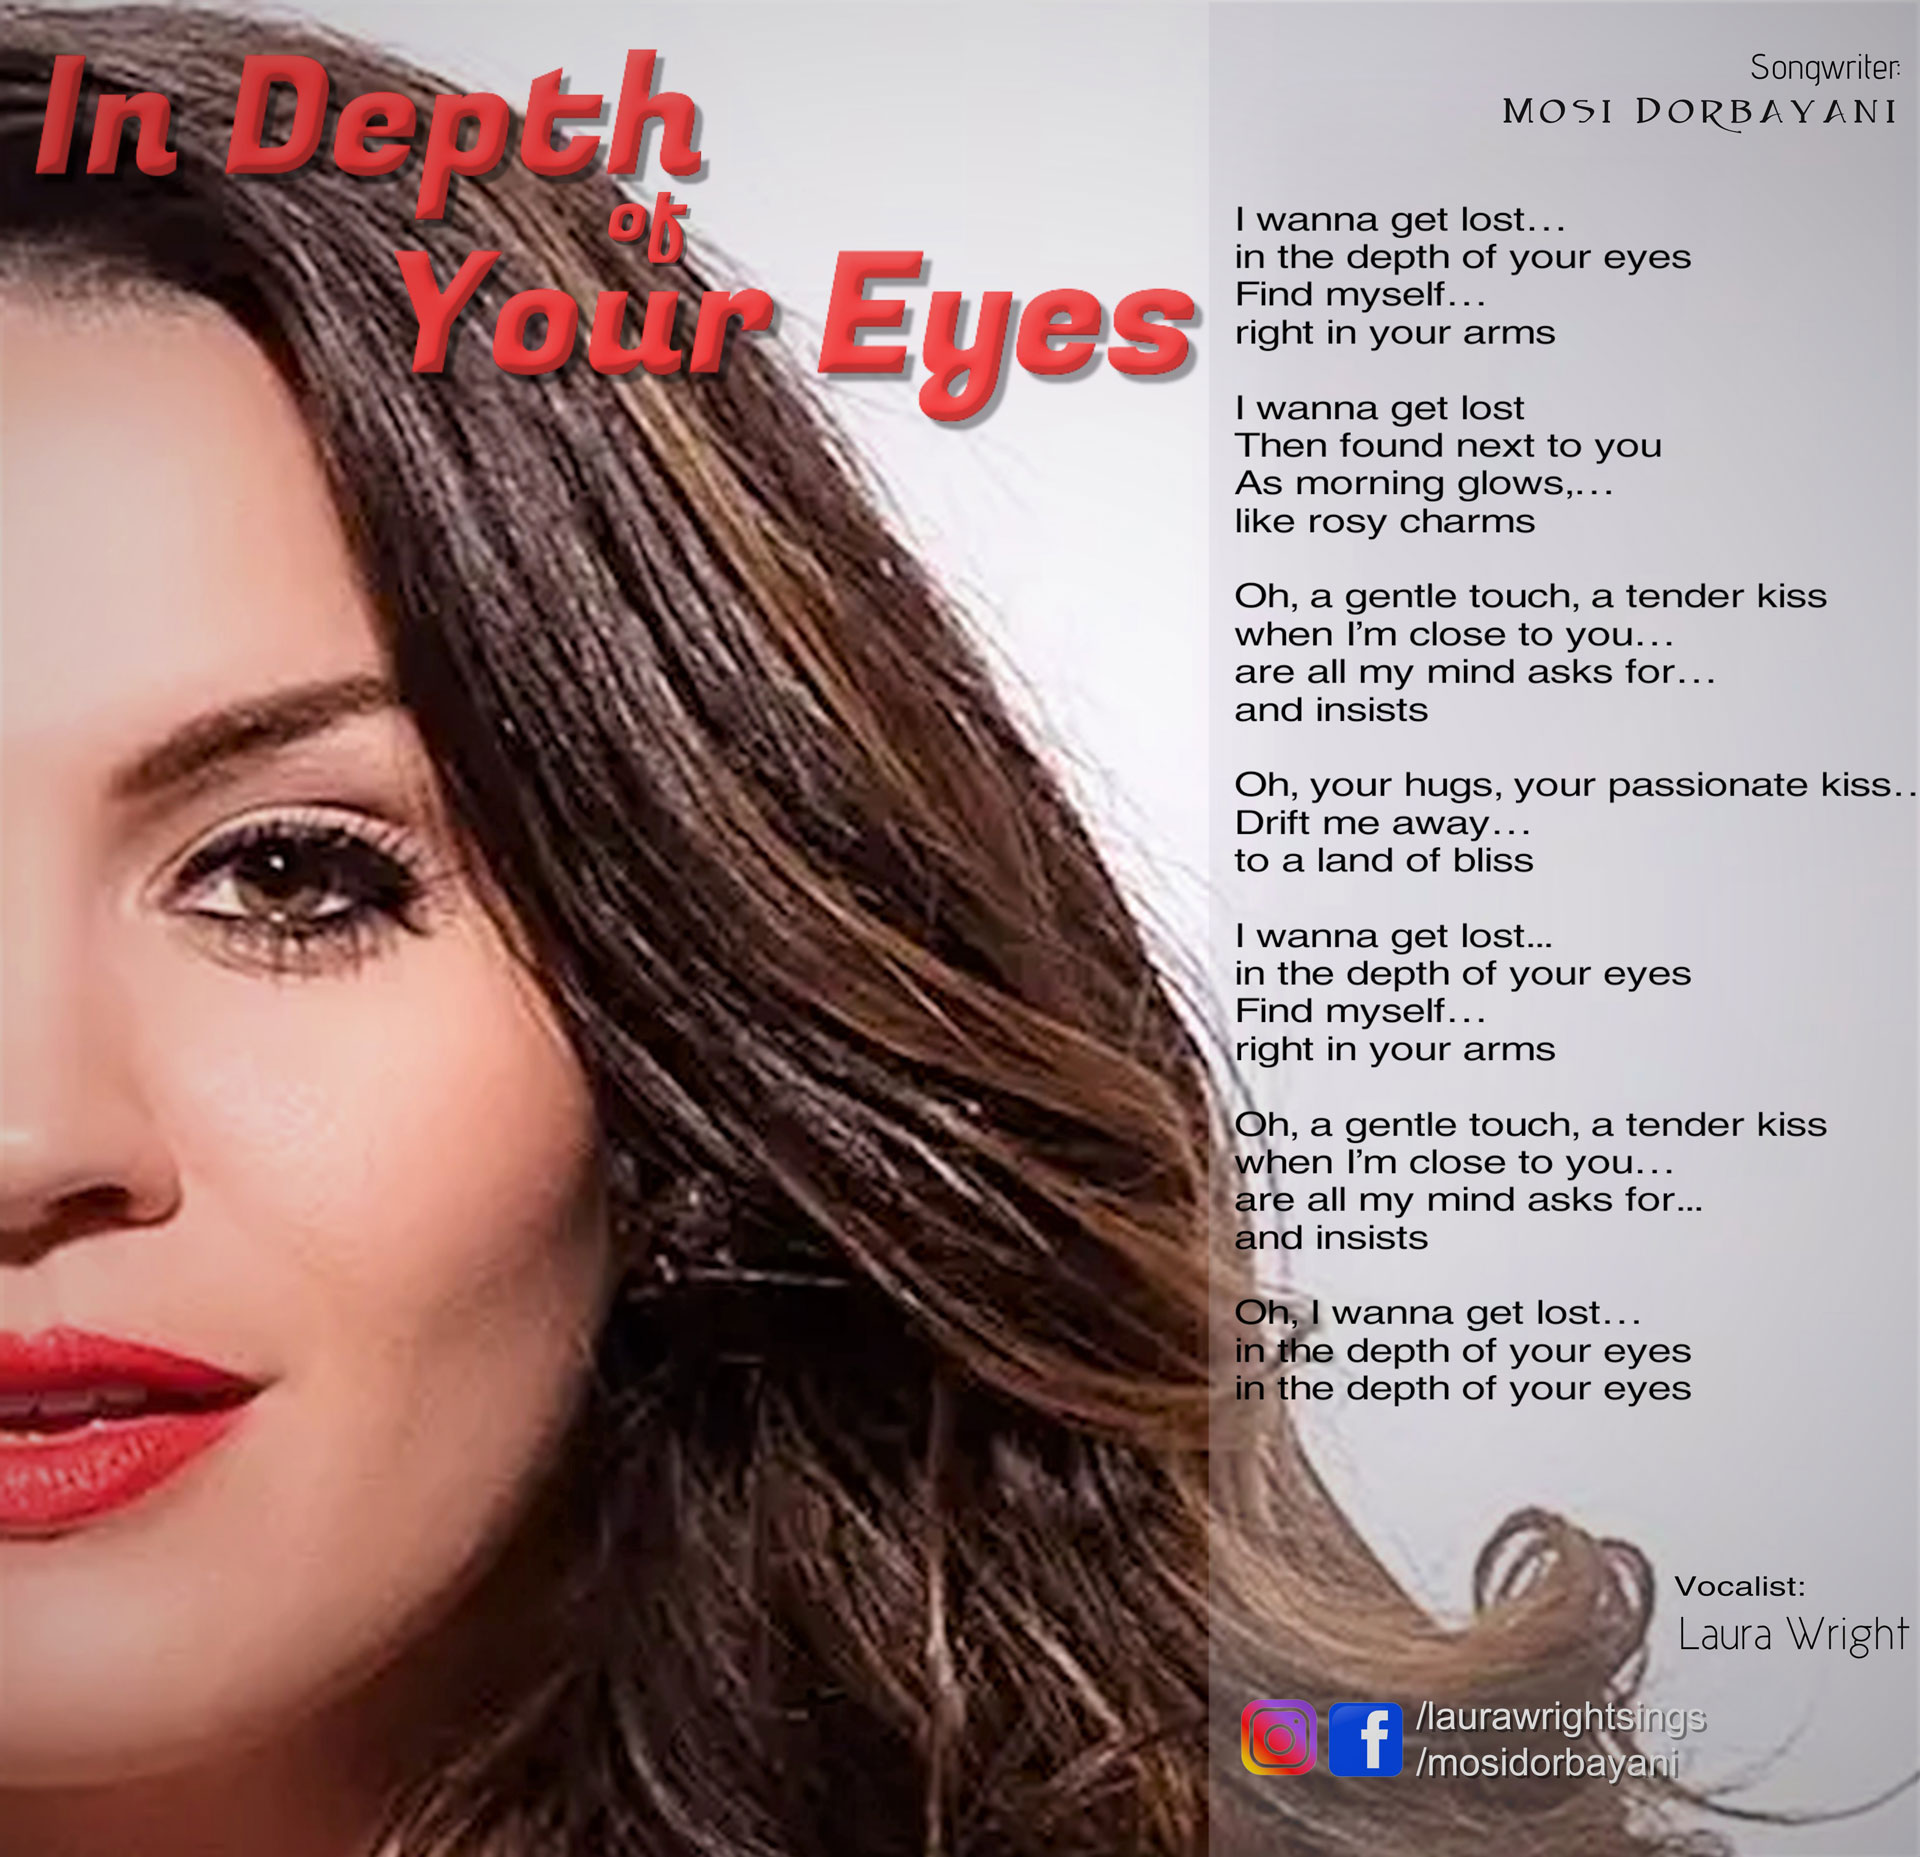 LIT Talent Awards - In Depth of Your Eyes